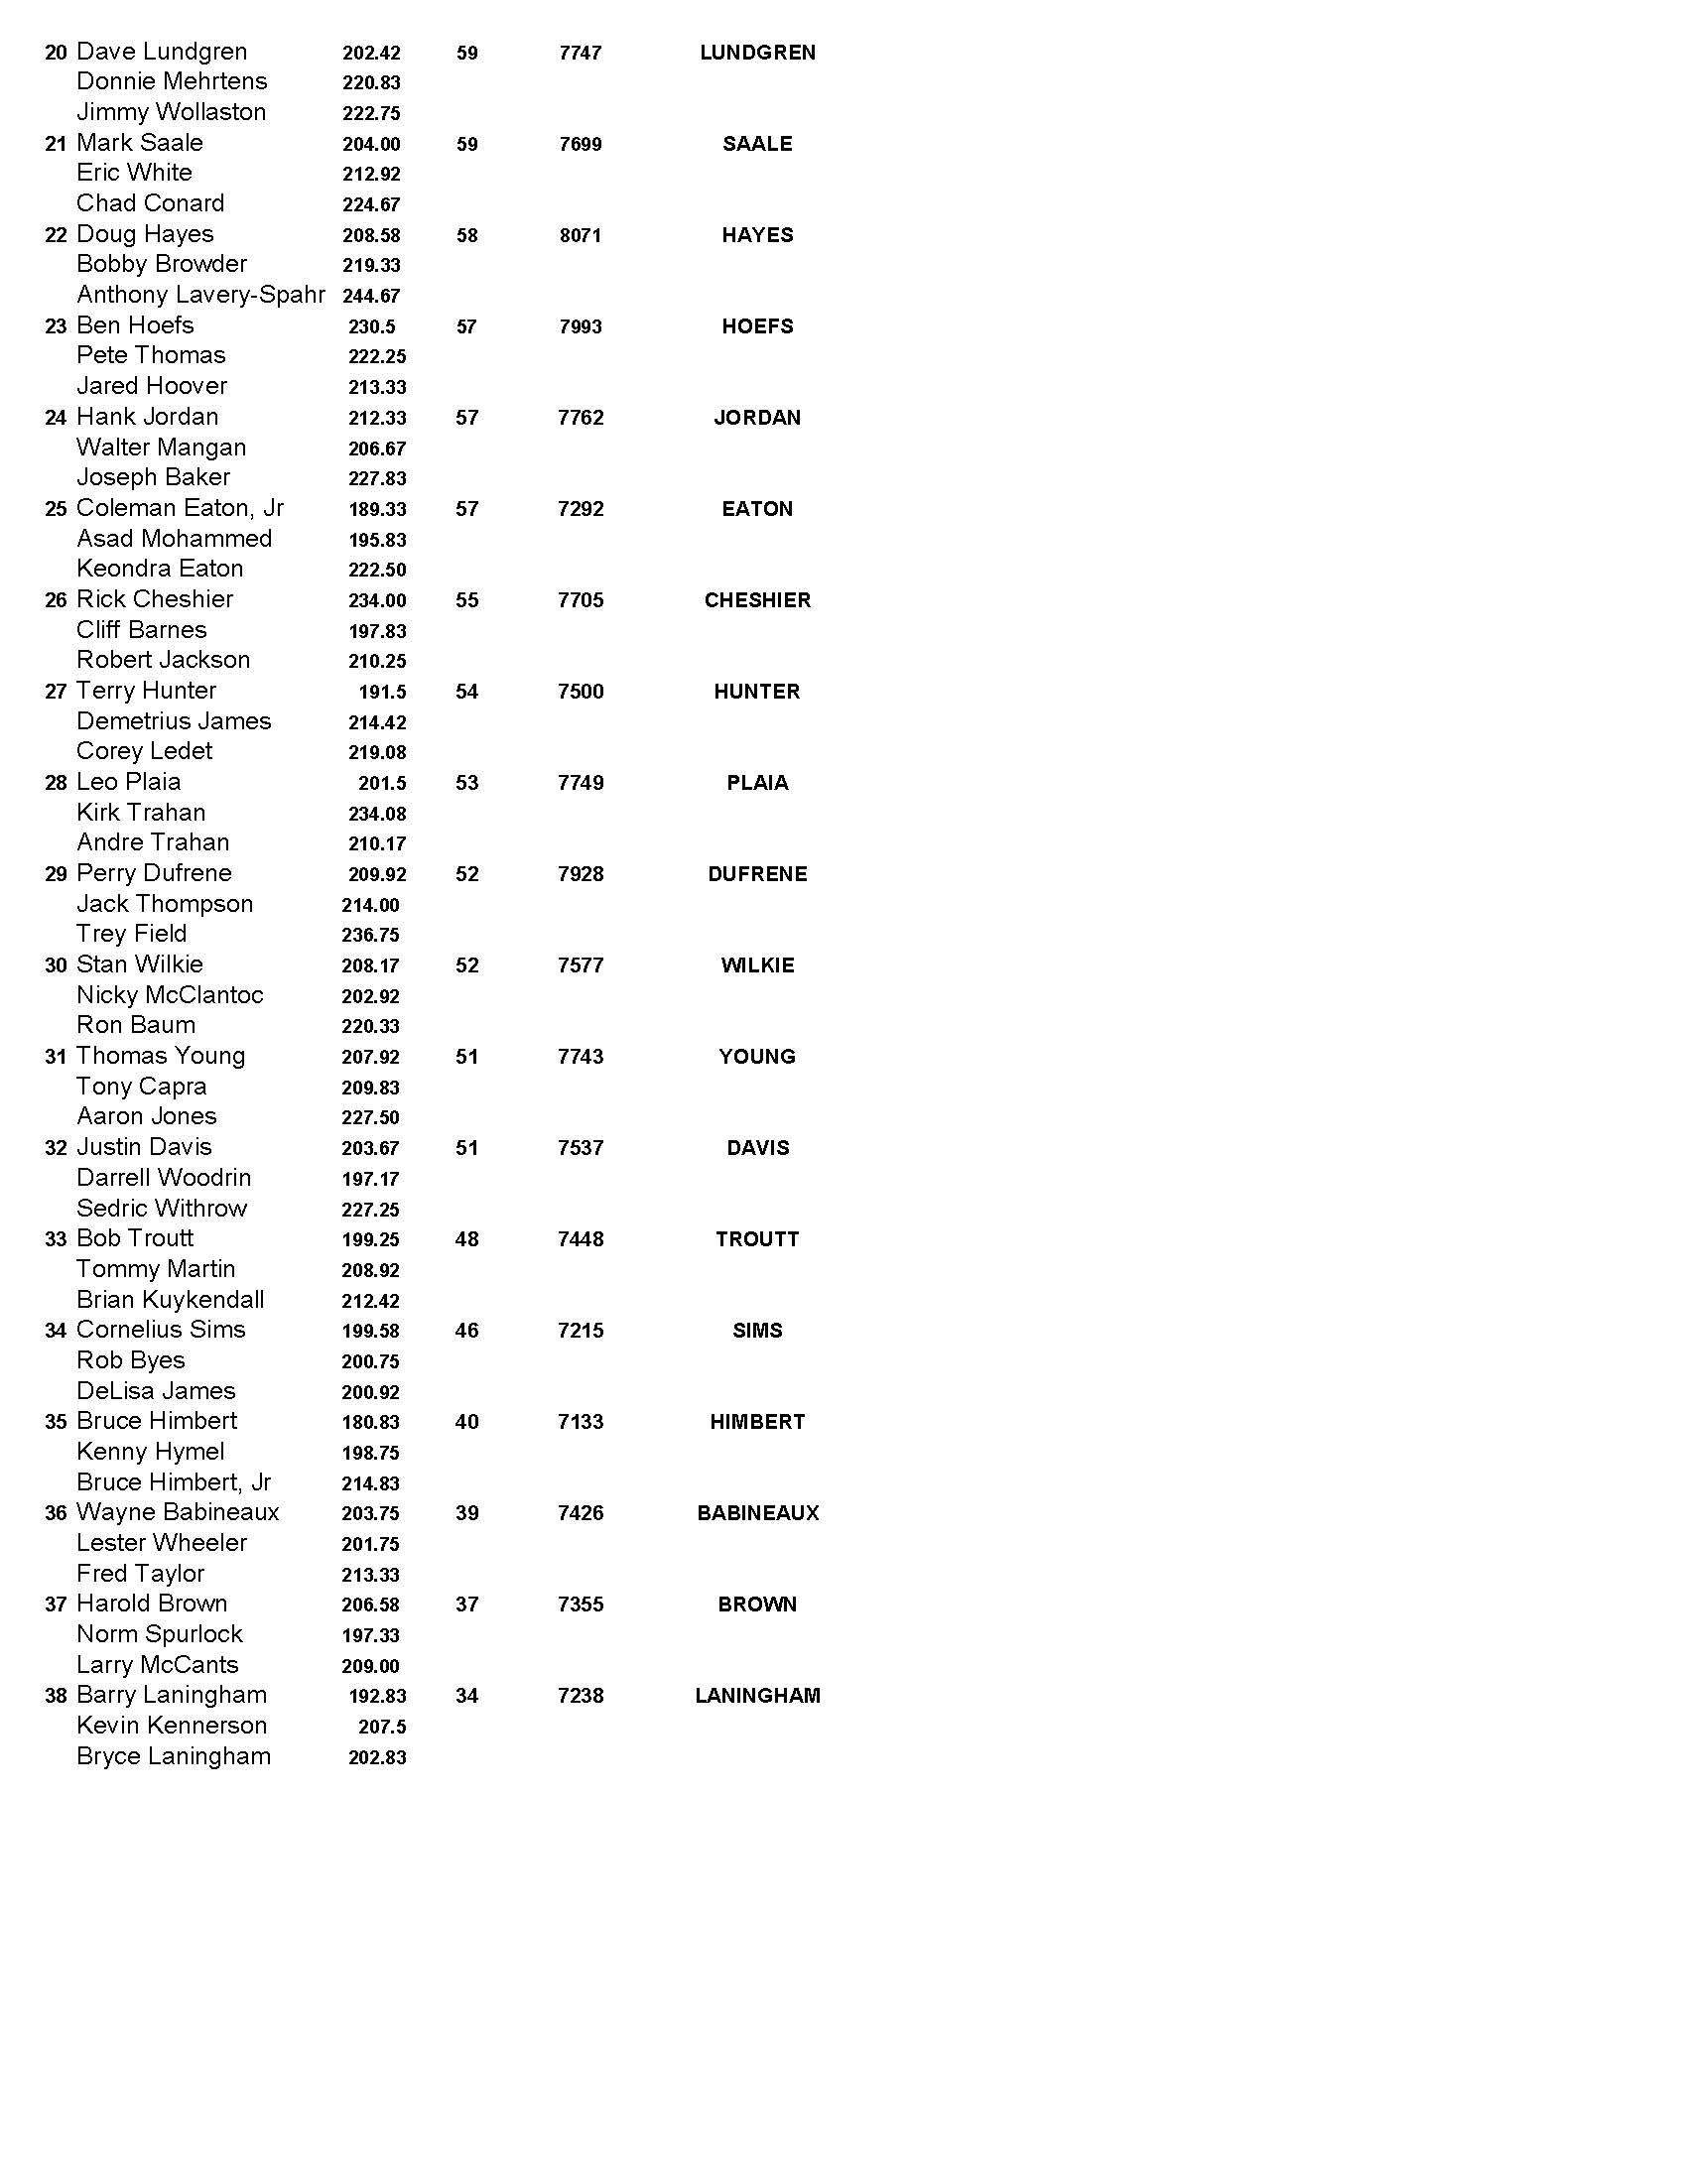 05162021results_Page_2